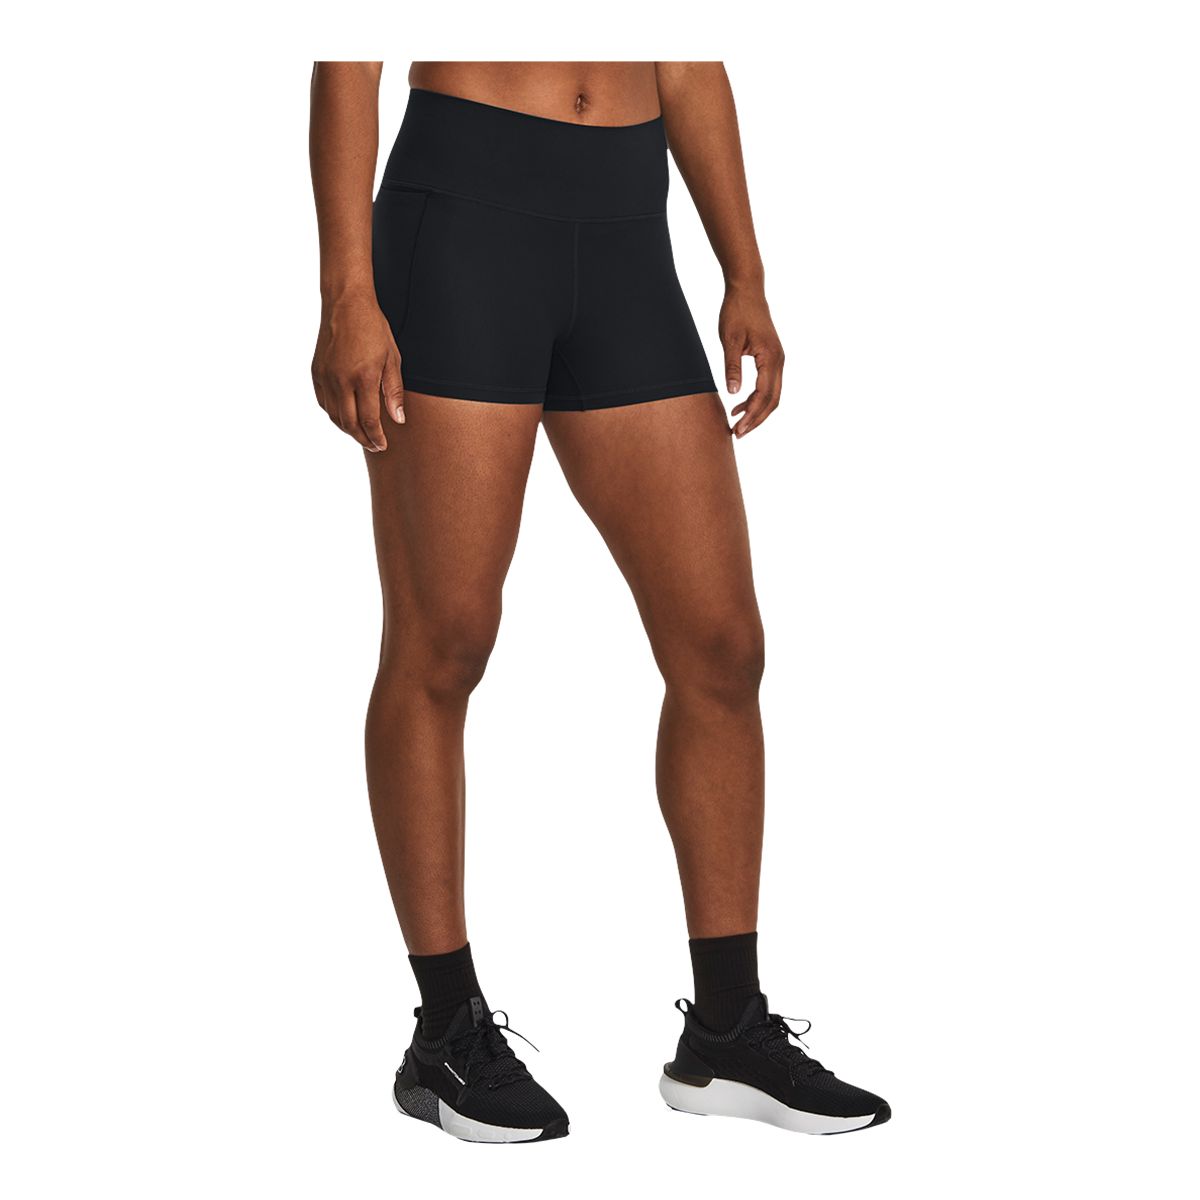 Under Armour Women's Meridian Shorty